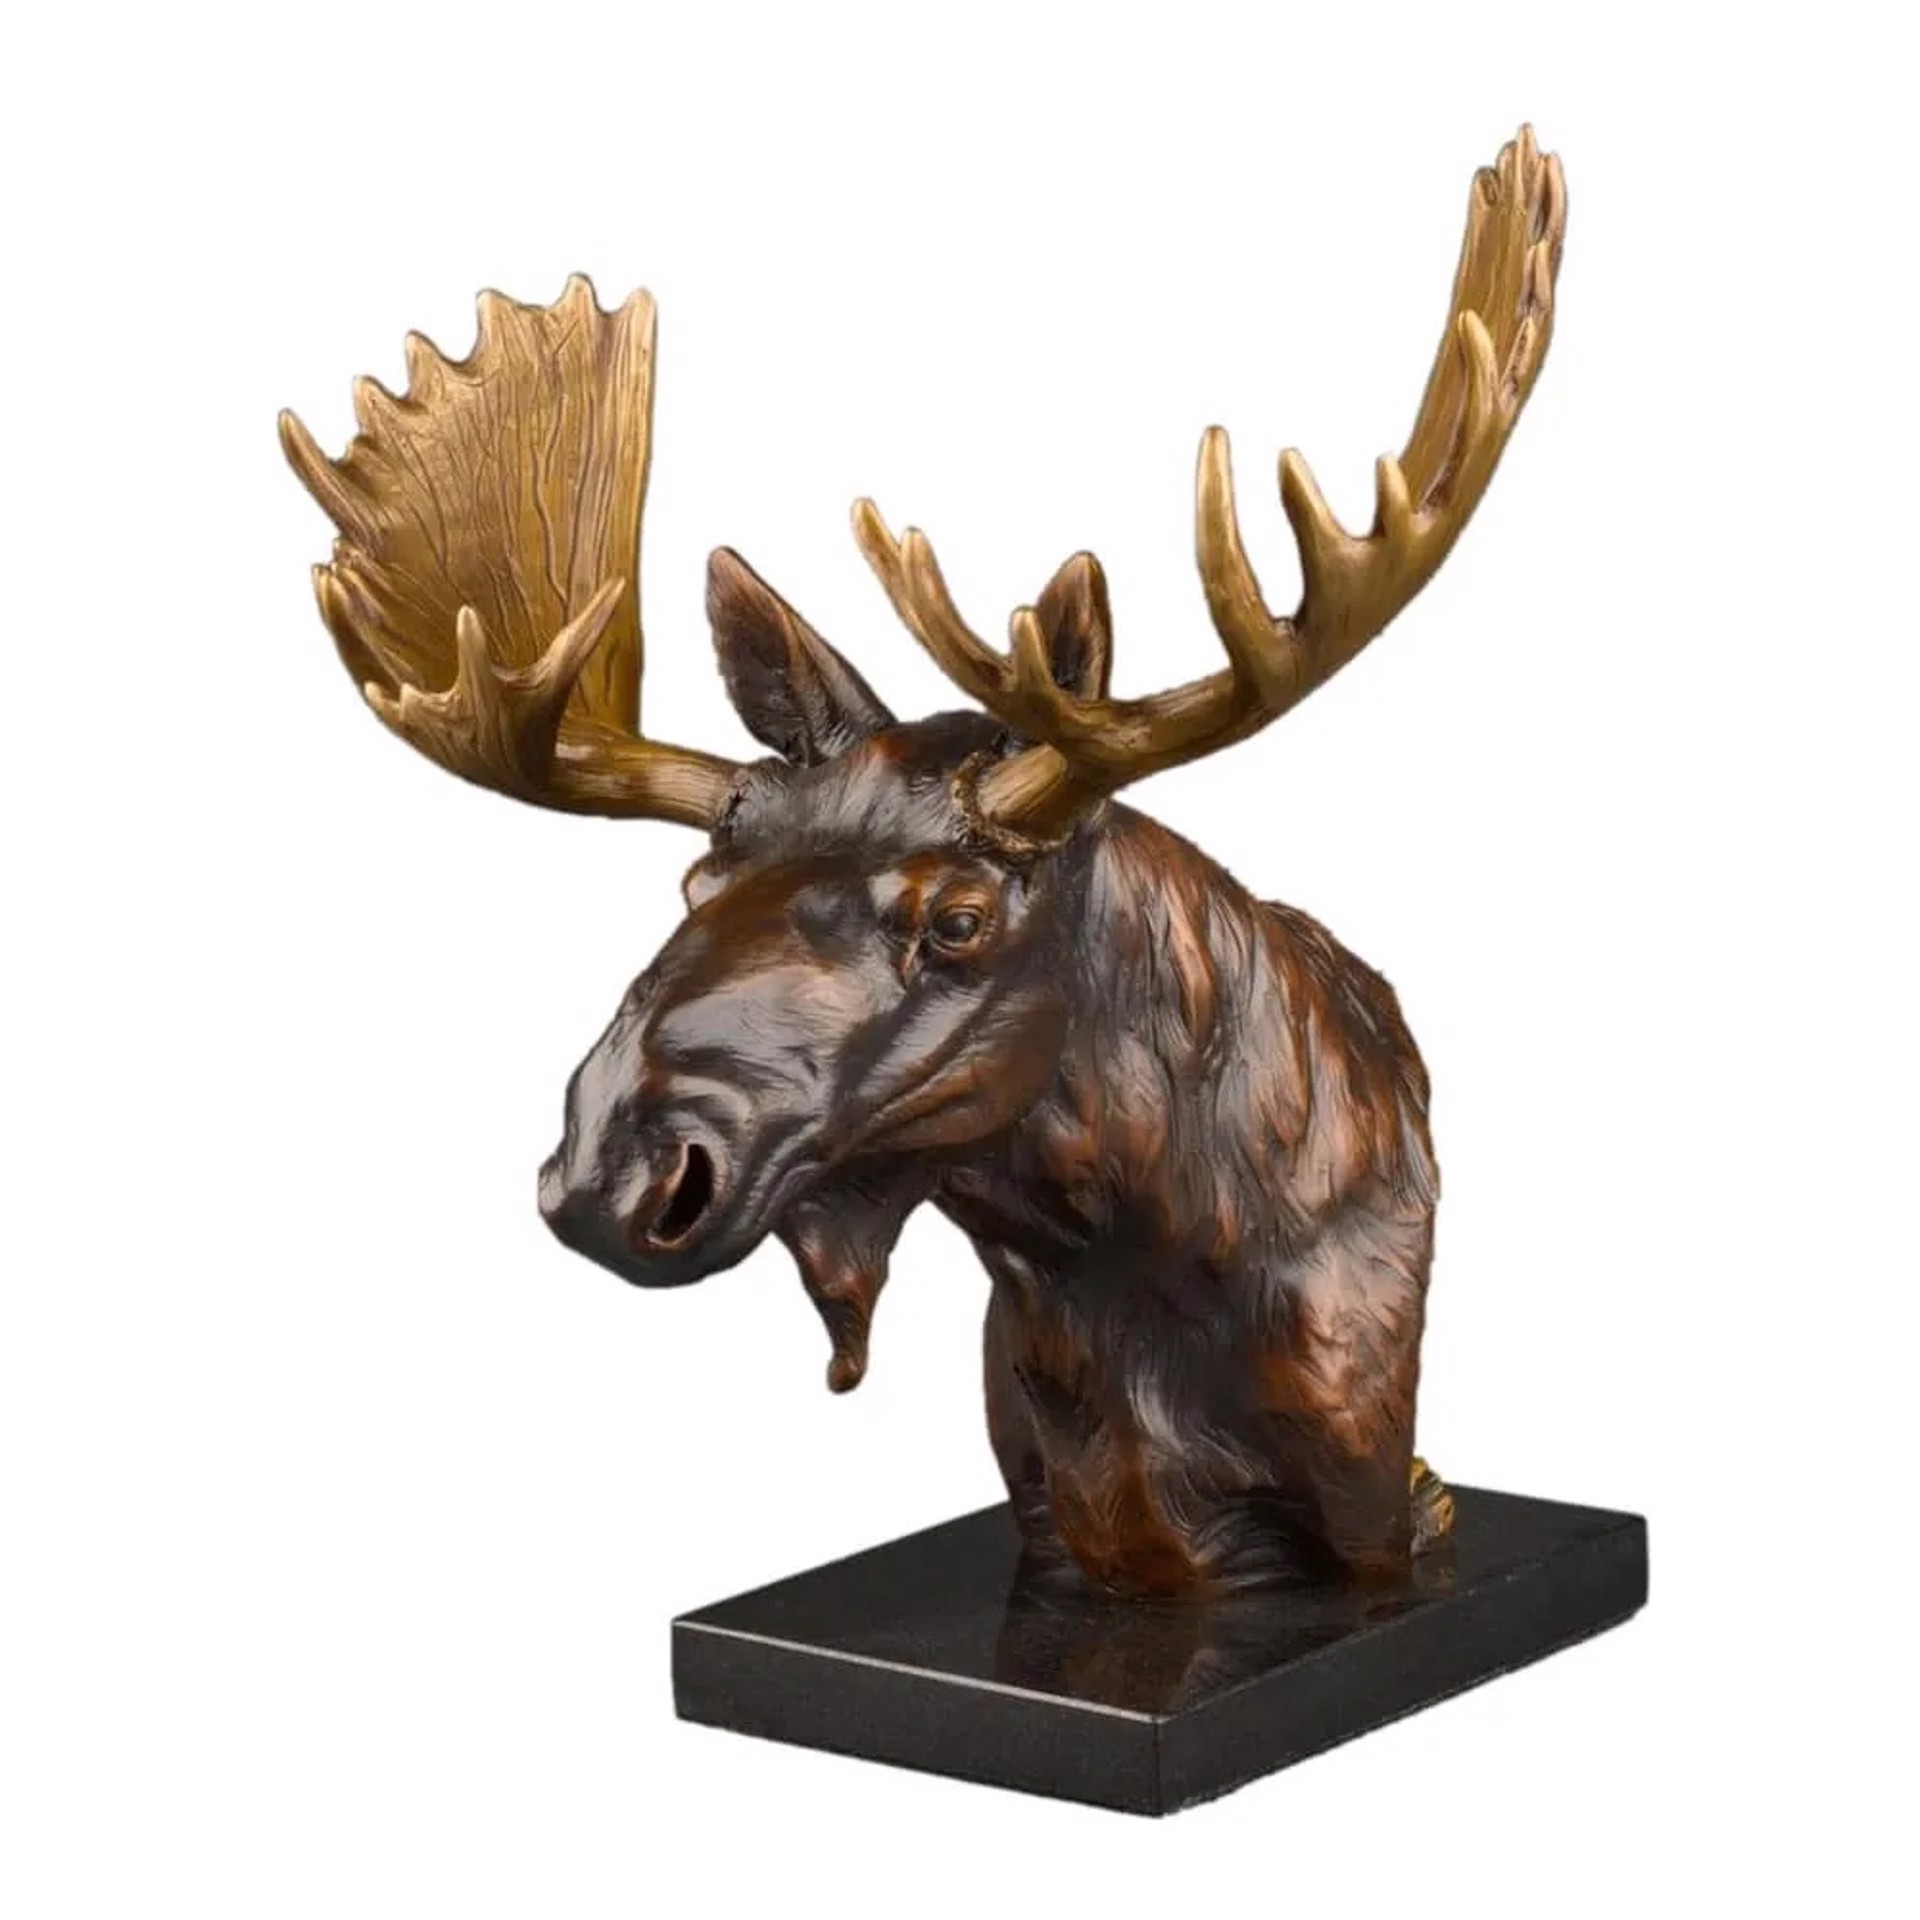 Moose Bust by Rip Caswell